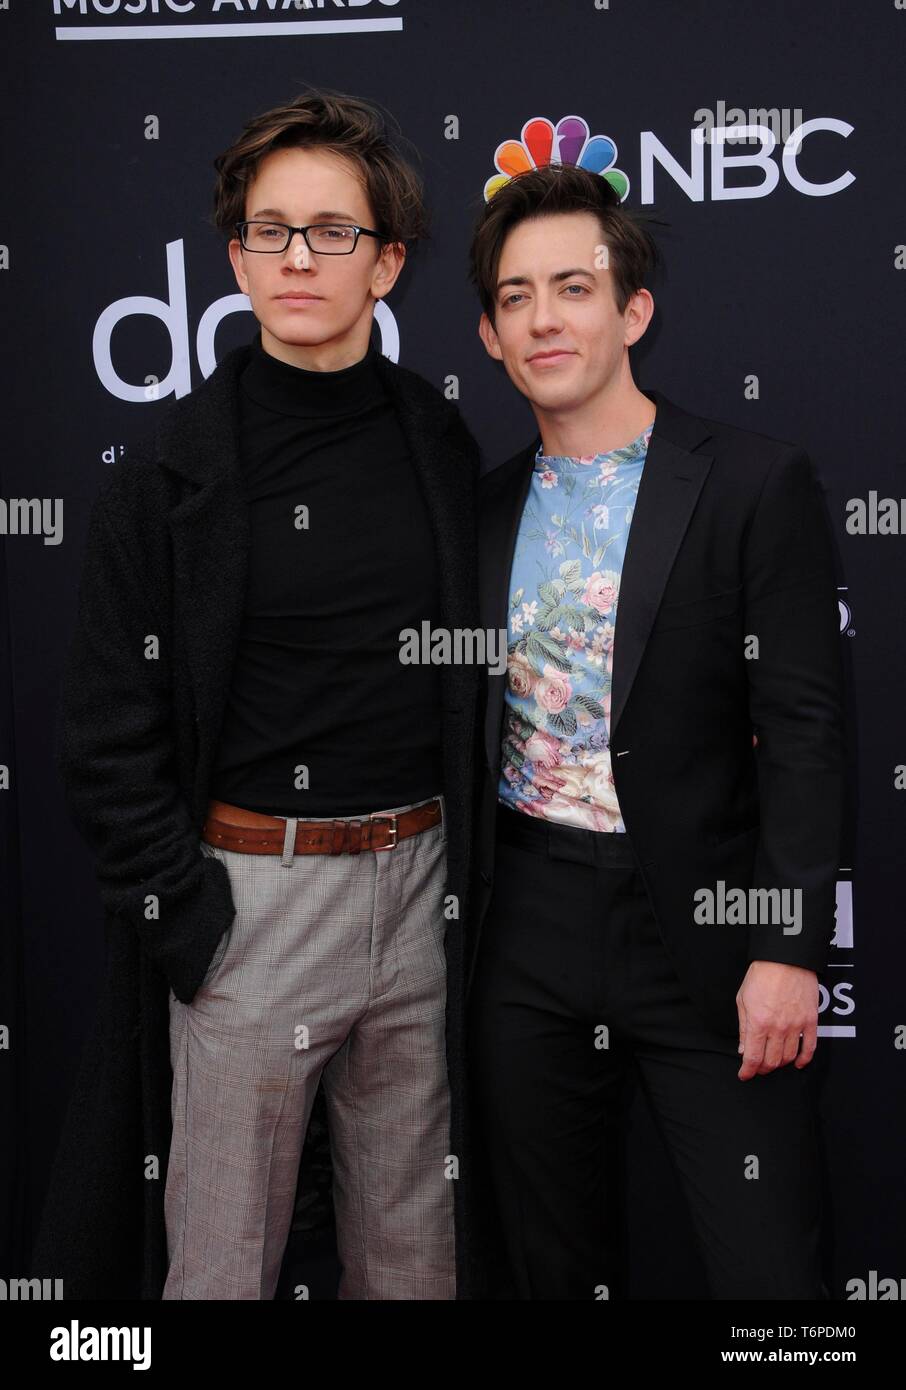 Las Vegas, NV, USA. 1st May, 2019. Austin P. McKenzie, Kevin McHale at arrivals for 2019 Billboard Music Awards - Arrivals 2, MGM Grand Garden Arena, Las Vegas, NV May 1, 2019. Credit: Elizabeth Goodenough/Everett Collection/Alamy Live News Stock Photo